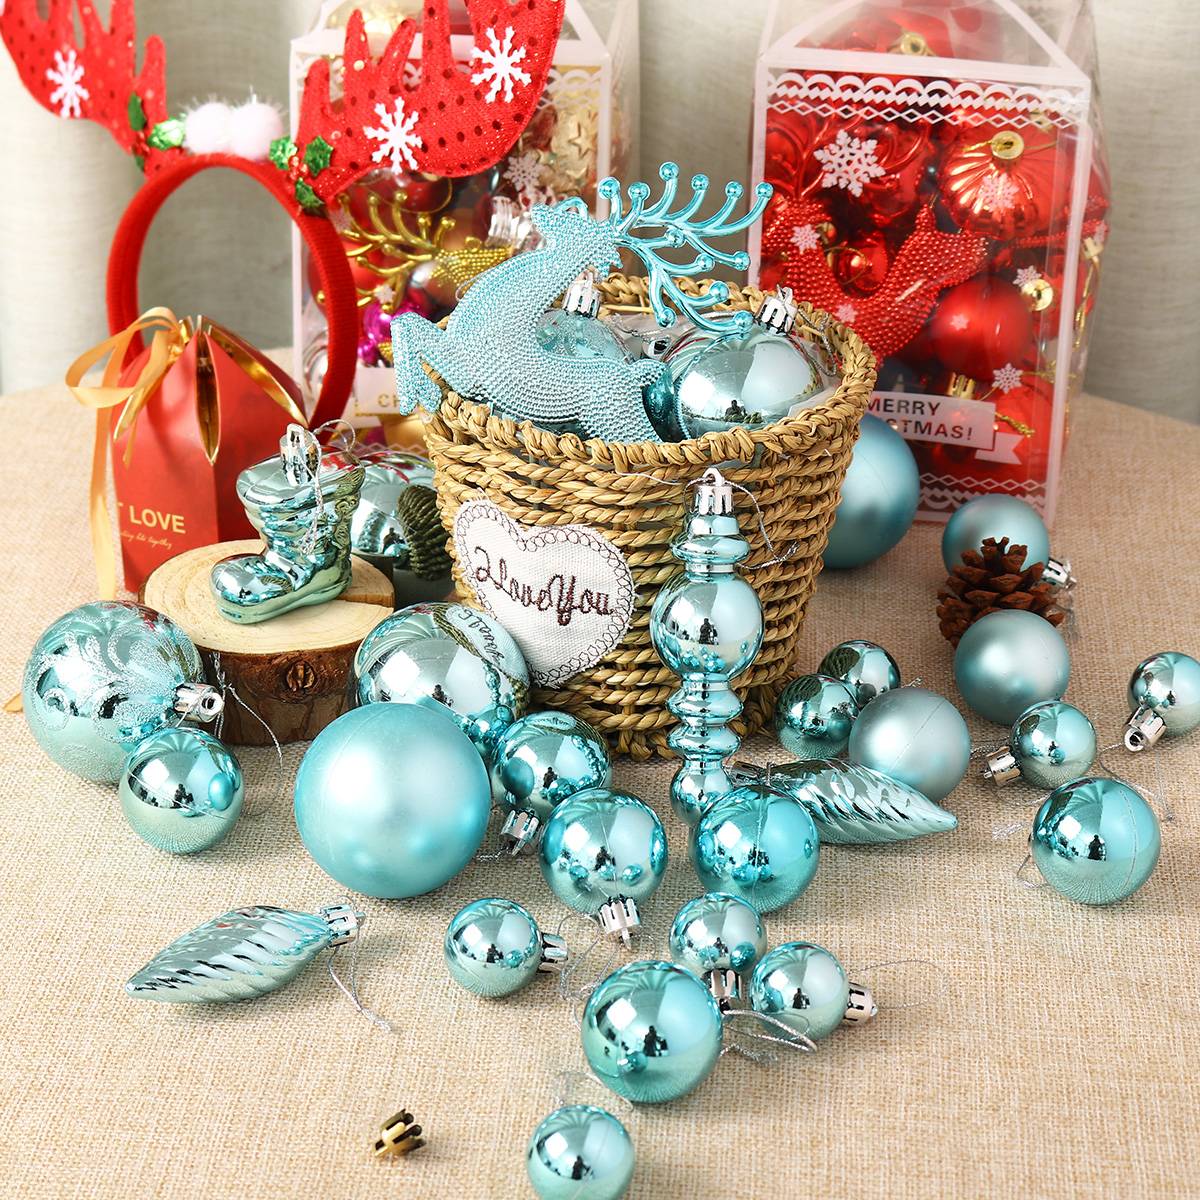 30-PcsSet-Glitter-Christmas-Tree-Ball-Baubles-Colorful-for-Xmas-Party-Home-Garden-Christmas-Decorati-1770980-3